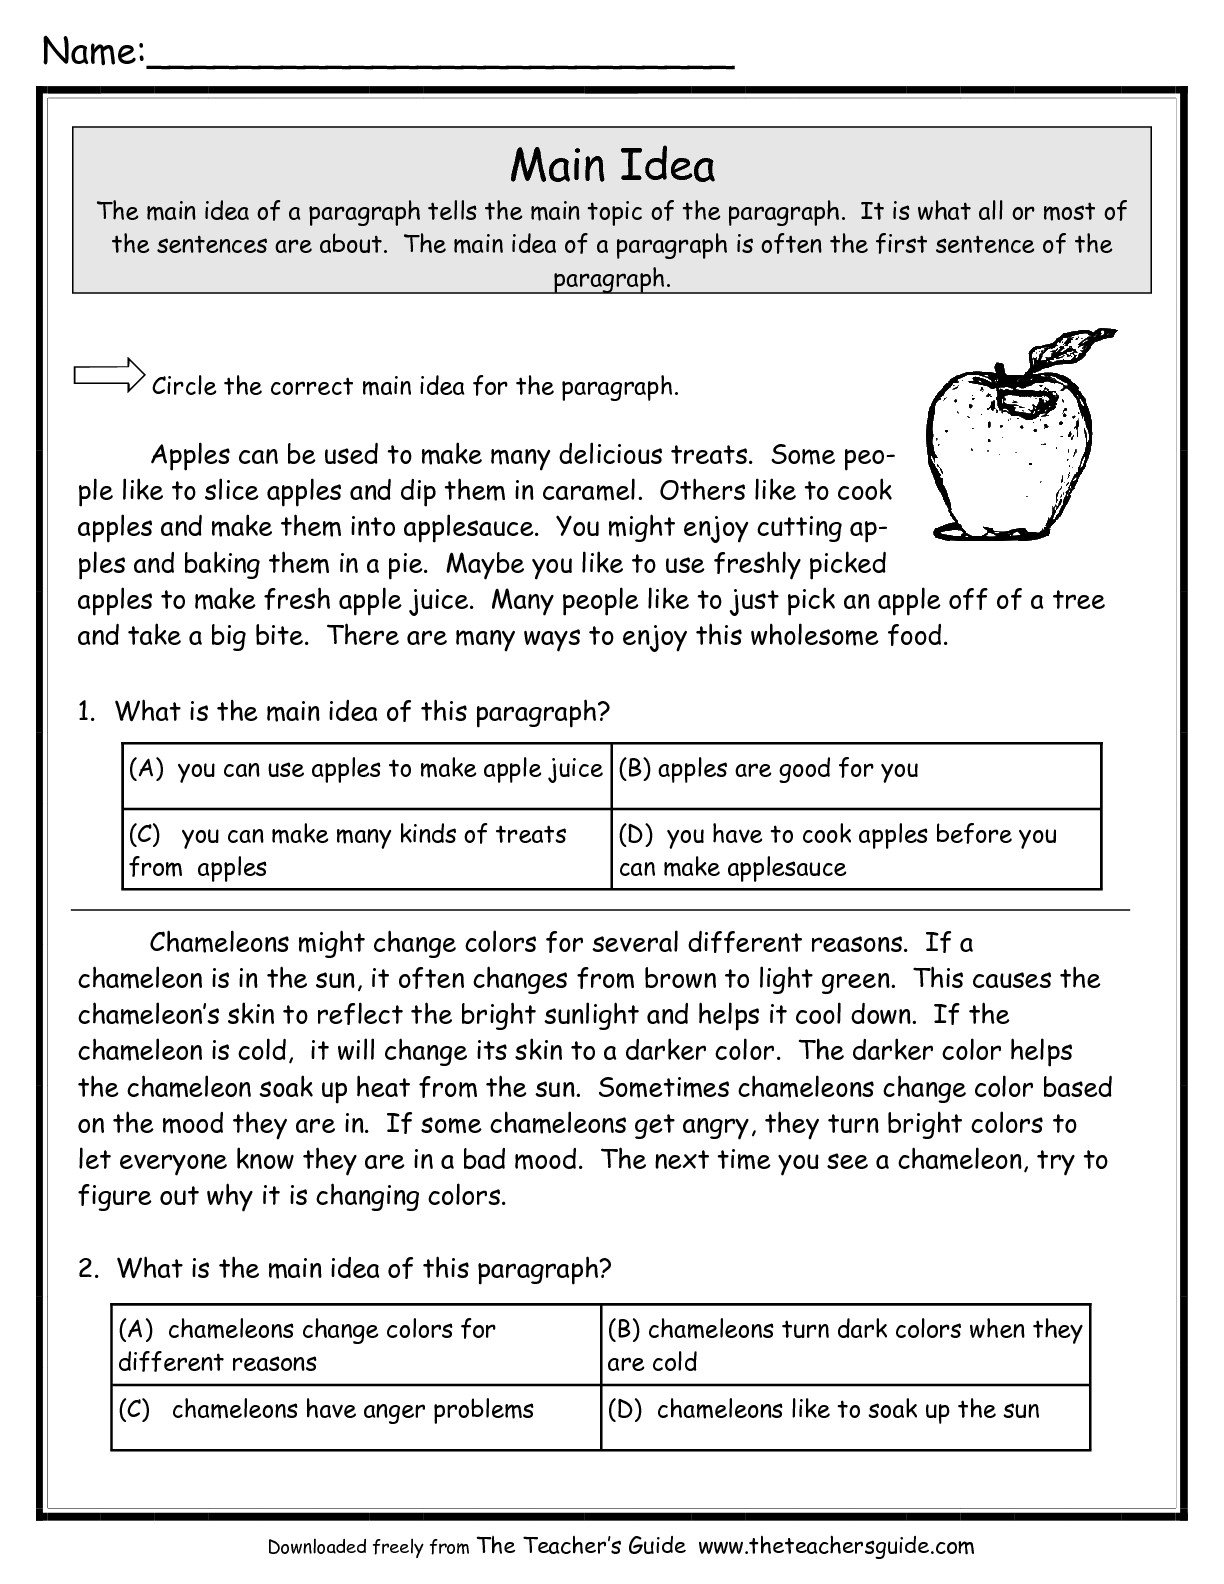 10 Ideal Main Idea And Supporting Details Passages main idea worksheets from the teachers guide 7 2023